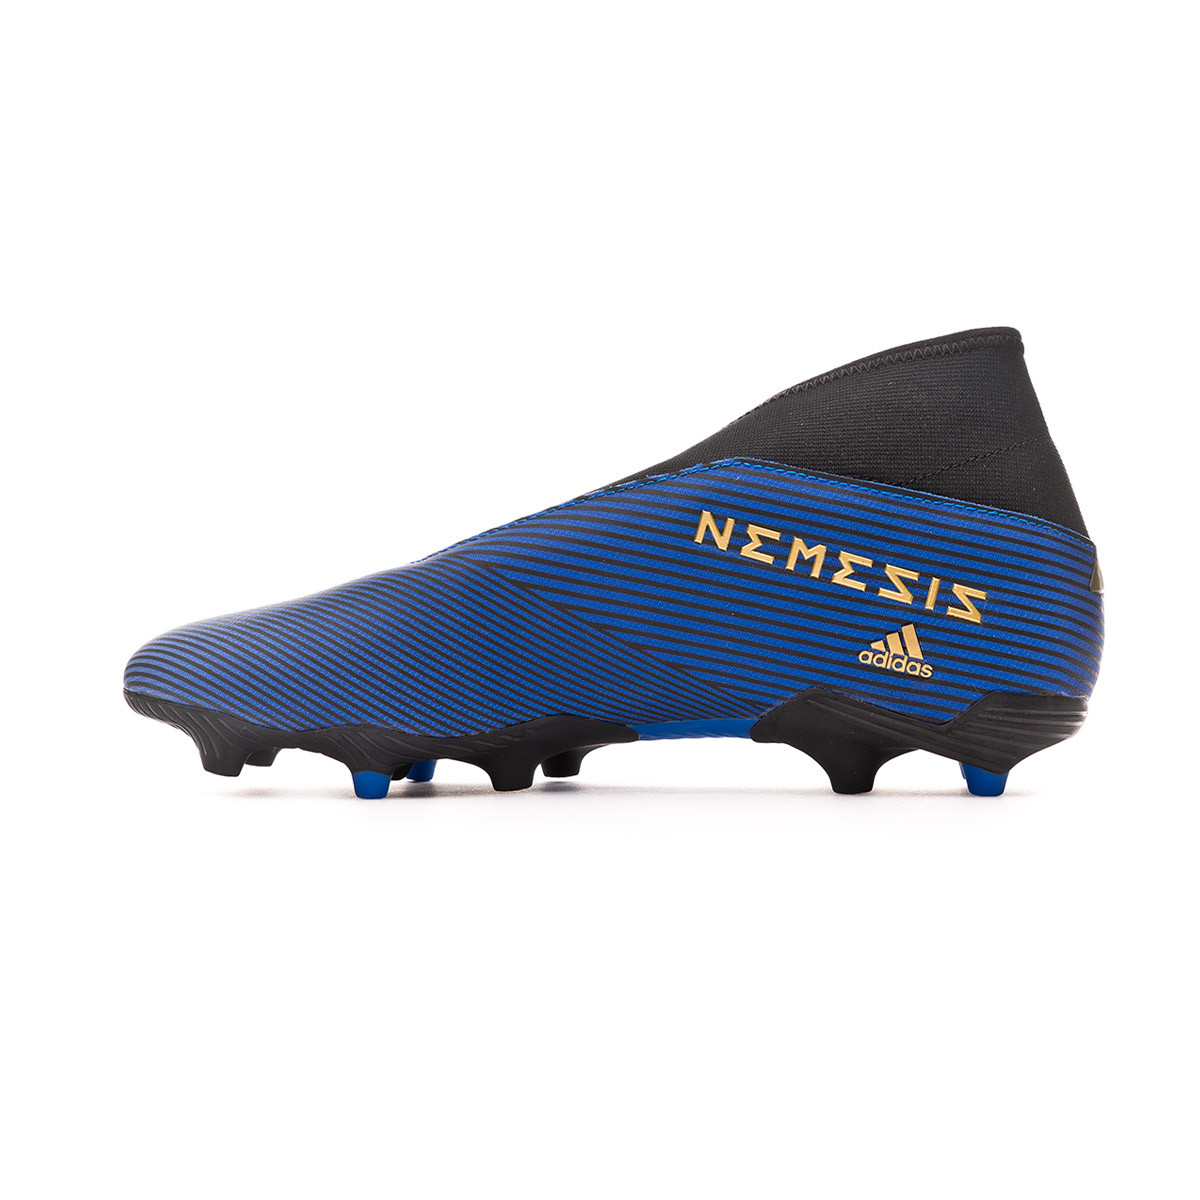 blue and gold adidas football boots